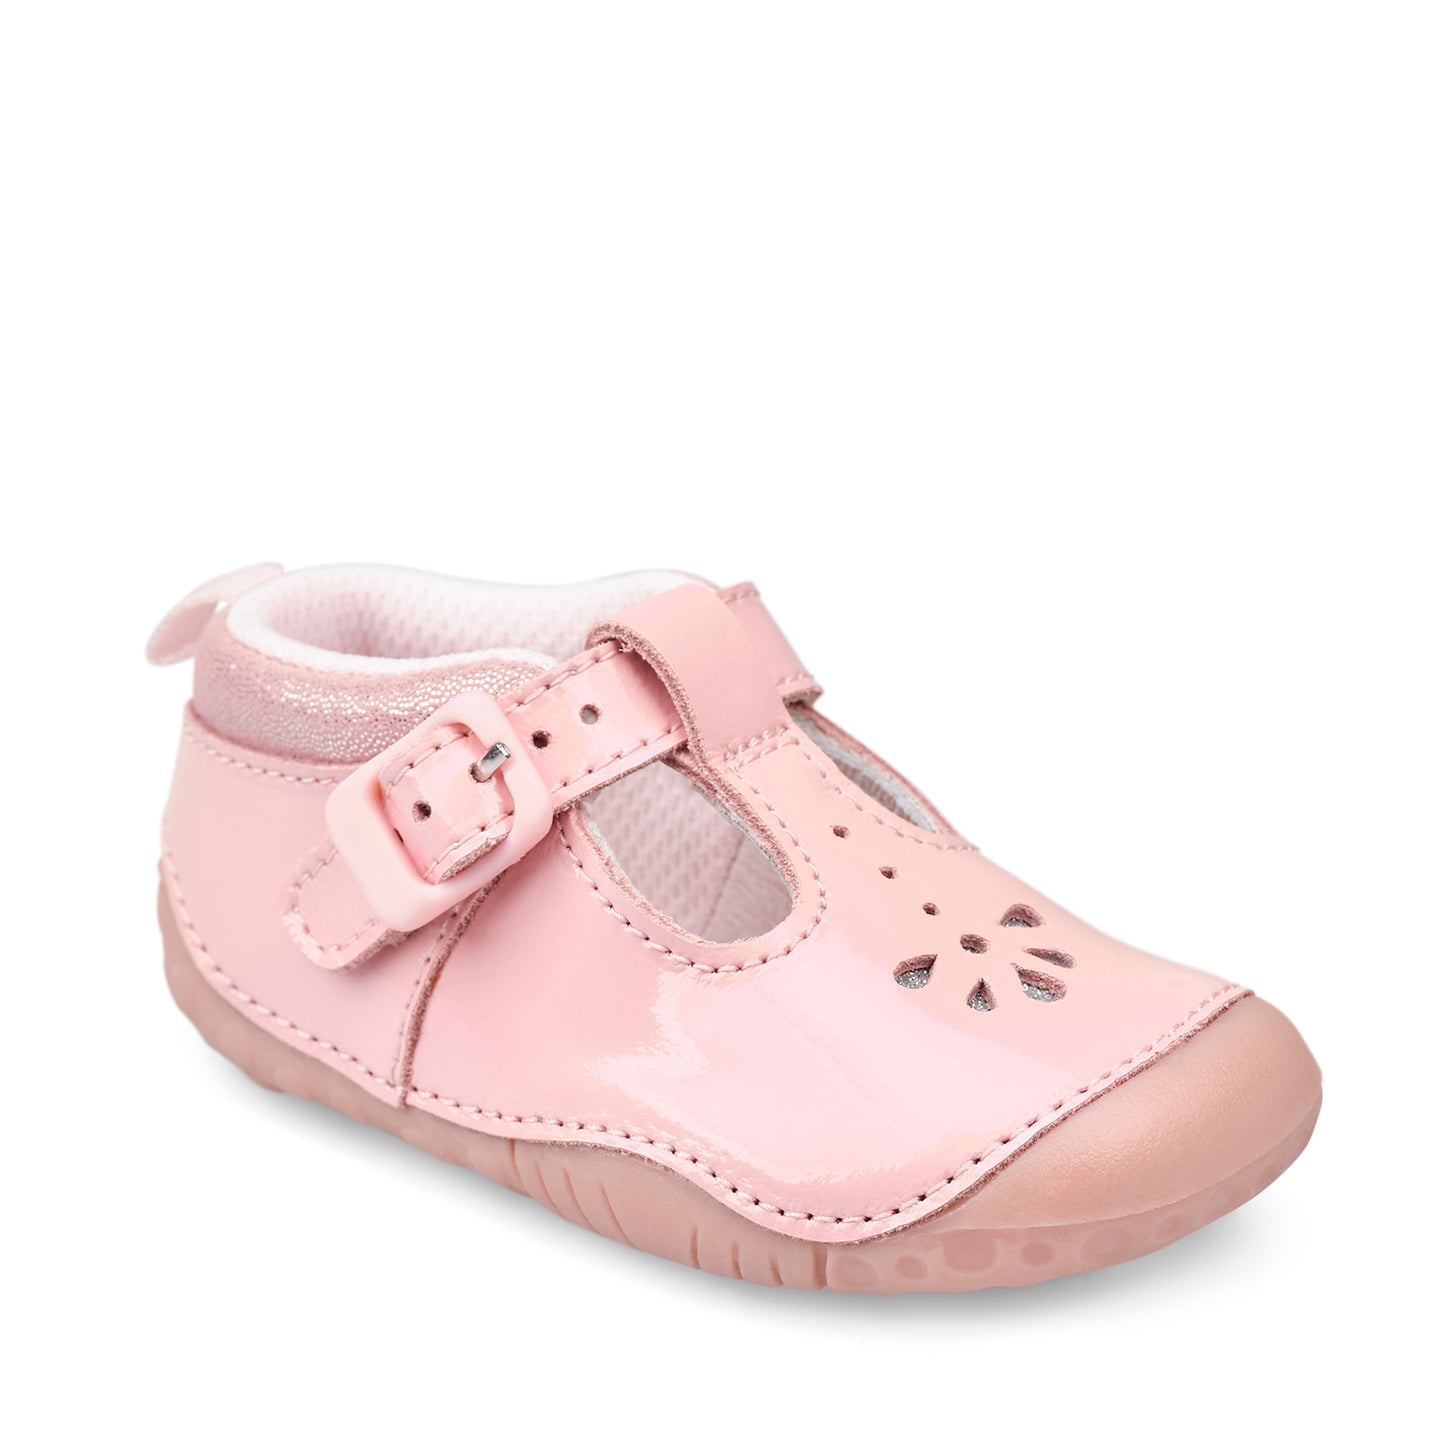 Baby Bubble Pink Patent Girl's T-Bar Pre-Walker